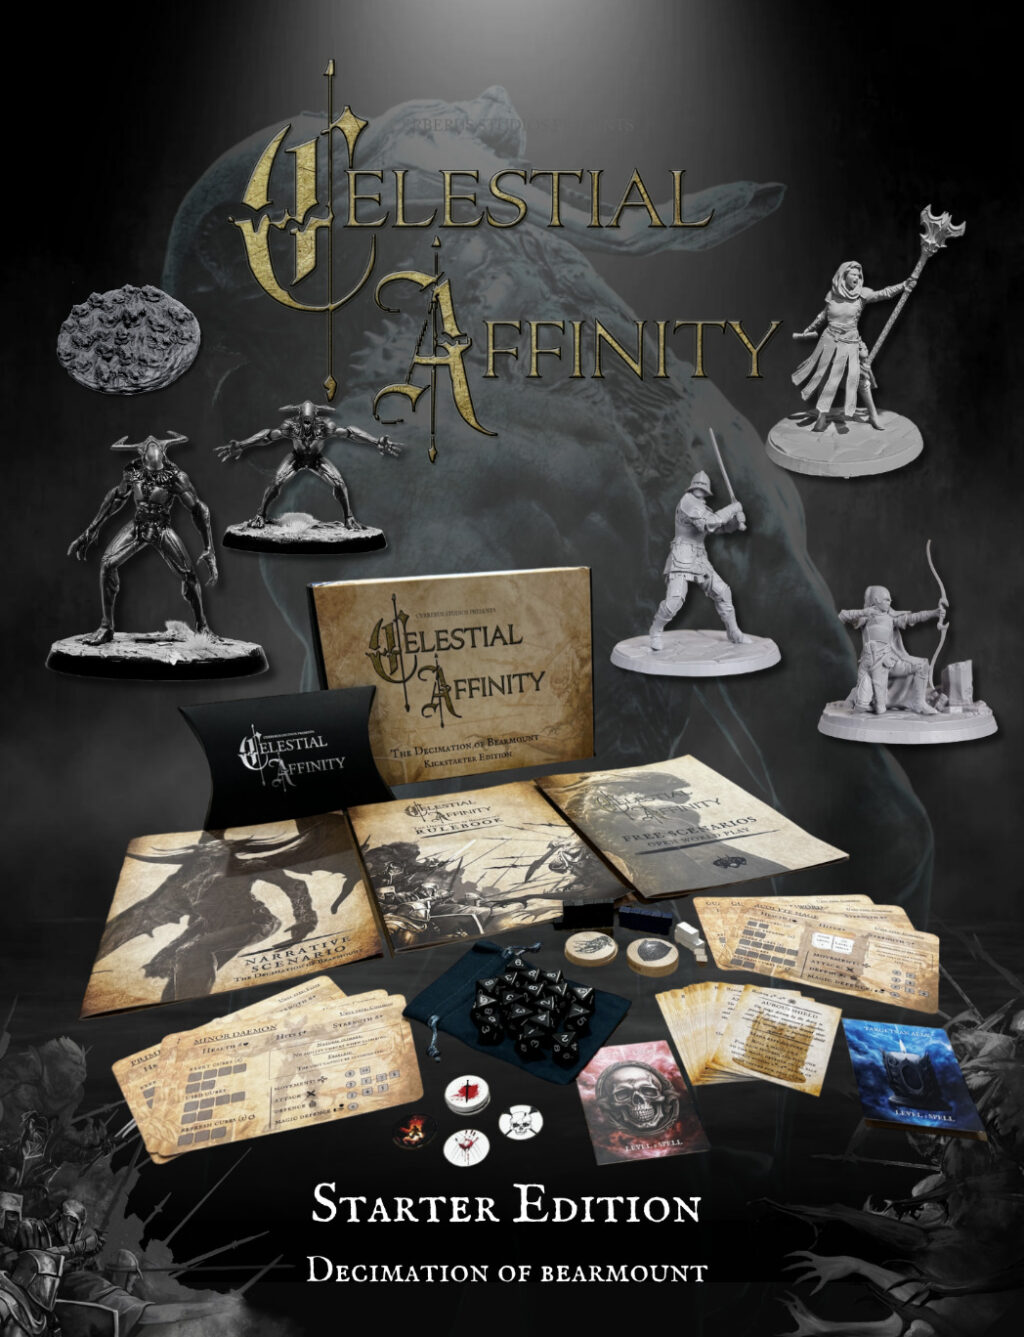 Cerberus Studios Unleashes Celestial Affinity: A 54mm Scale Skirmish Game Ready for Battle